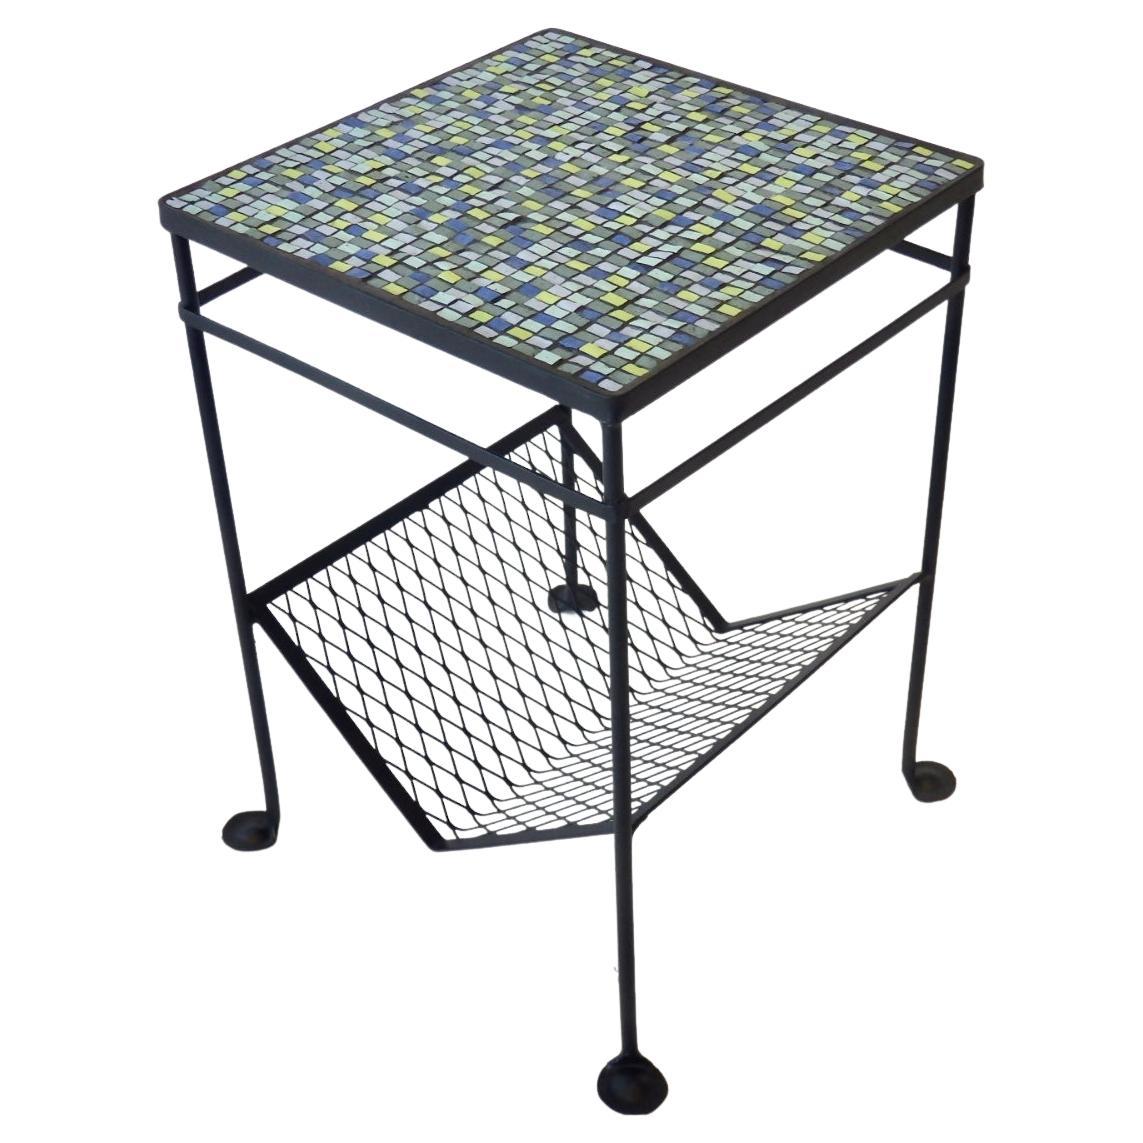 1950s Restored Mosaic Top Wrought Iron Table with Magazine Rack